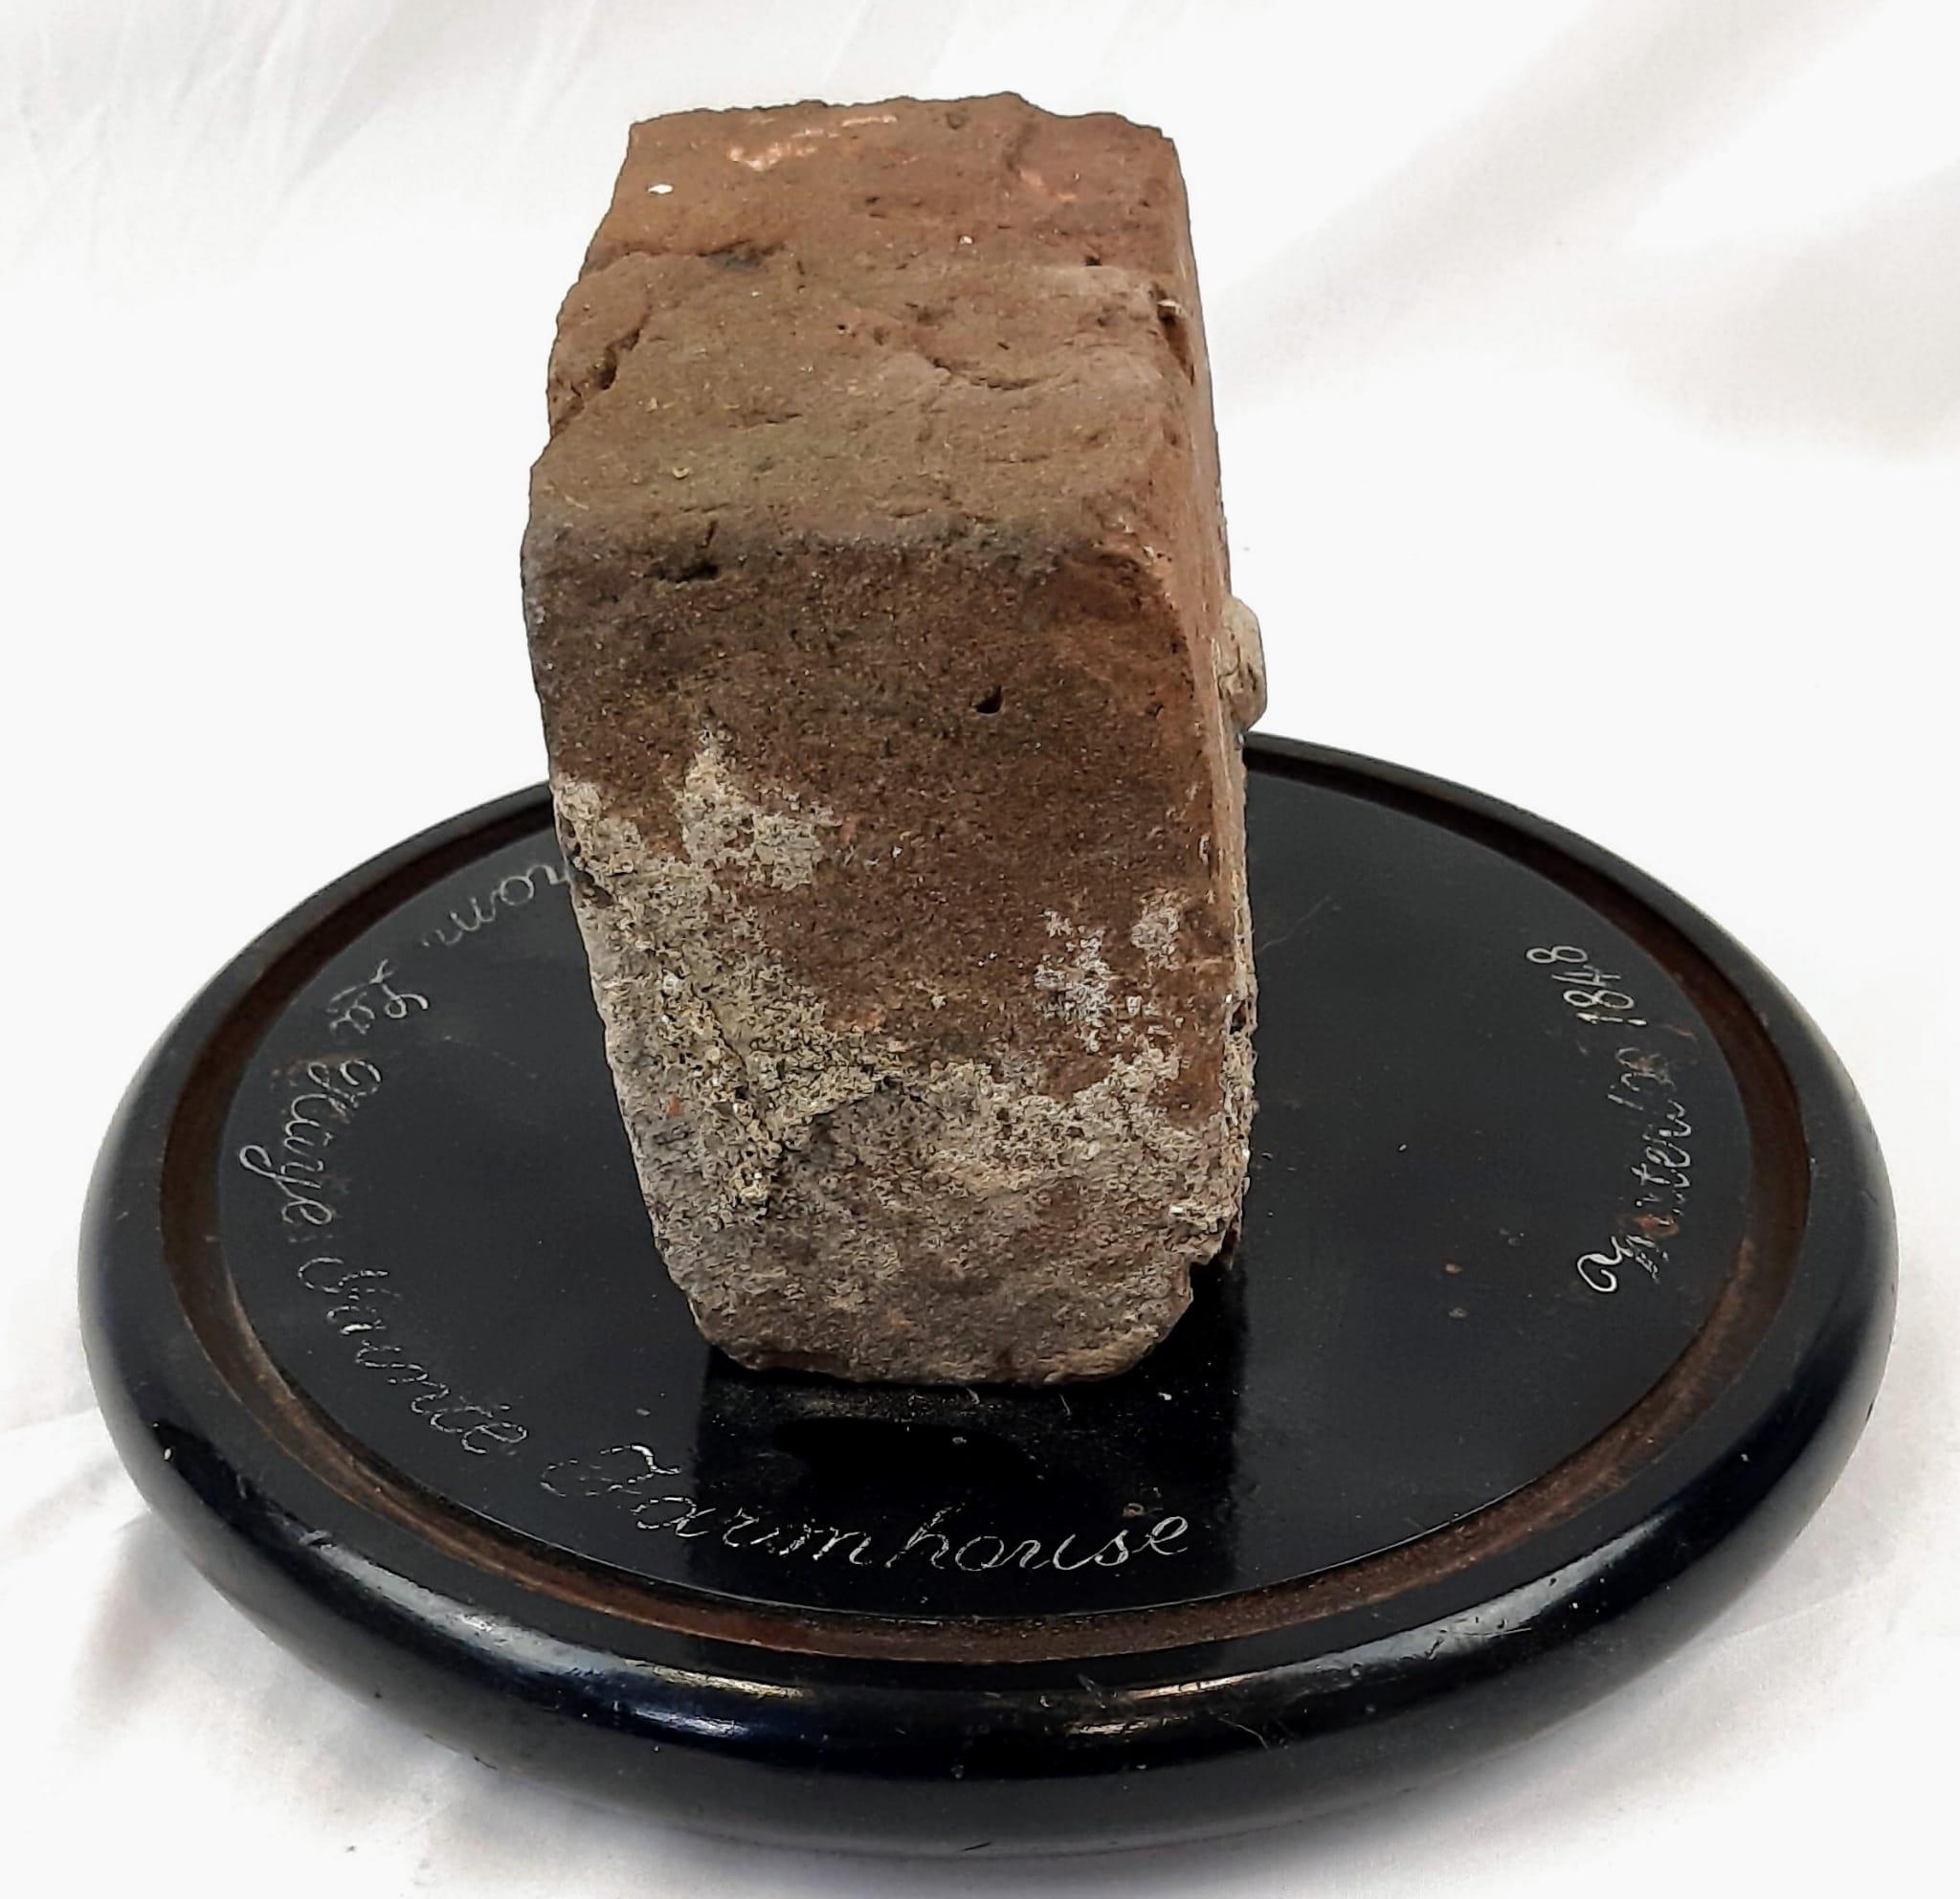 A Waterloo Brick! A Brick From The Farmhouse La Haye Sainte, Waterloo. It contains a musket ball - - Image 4 of 9